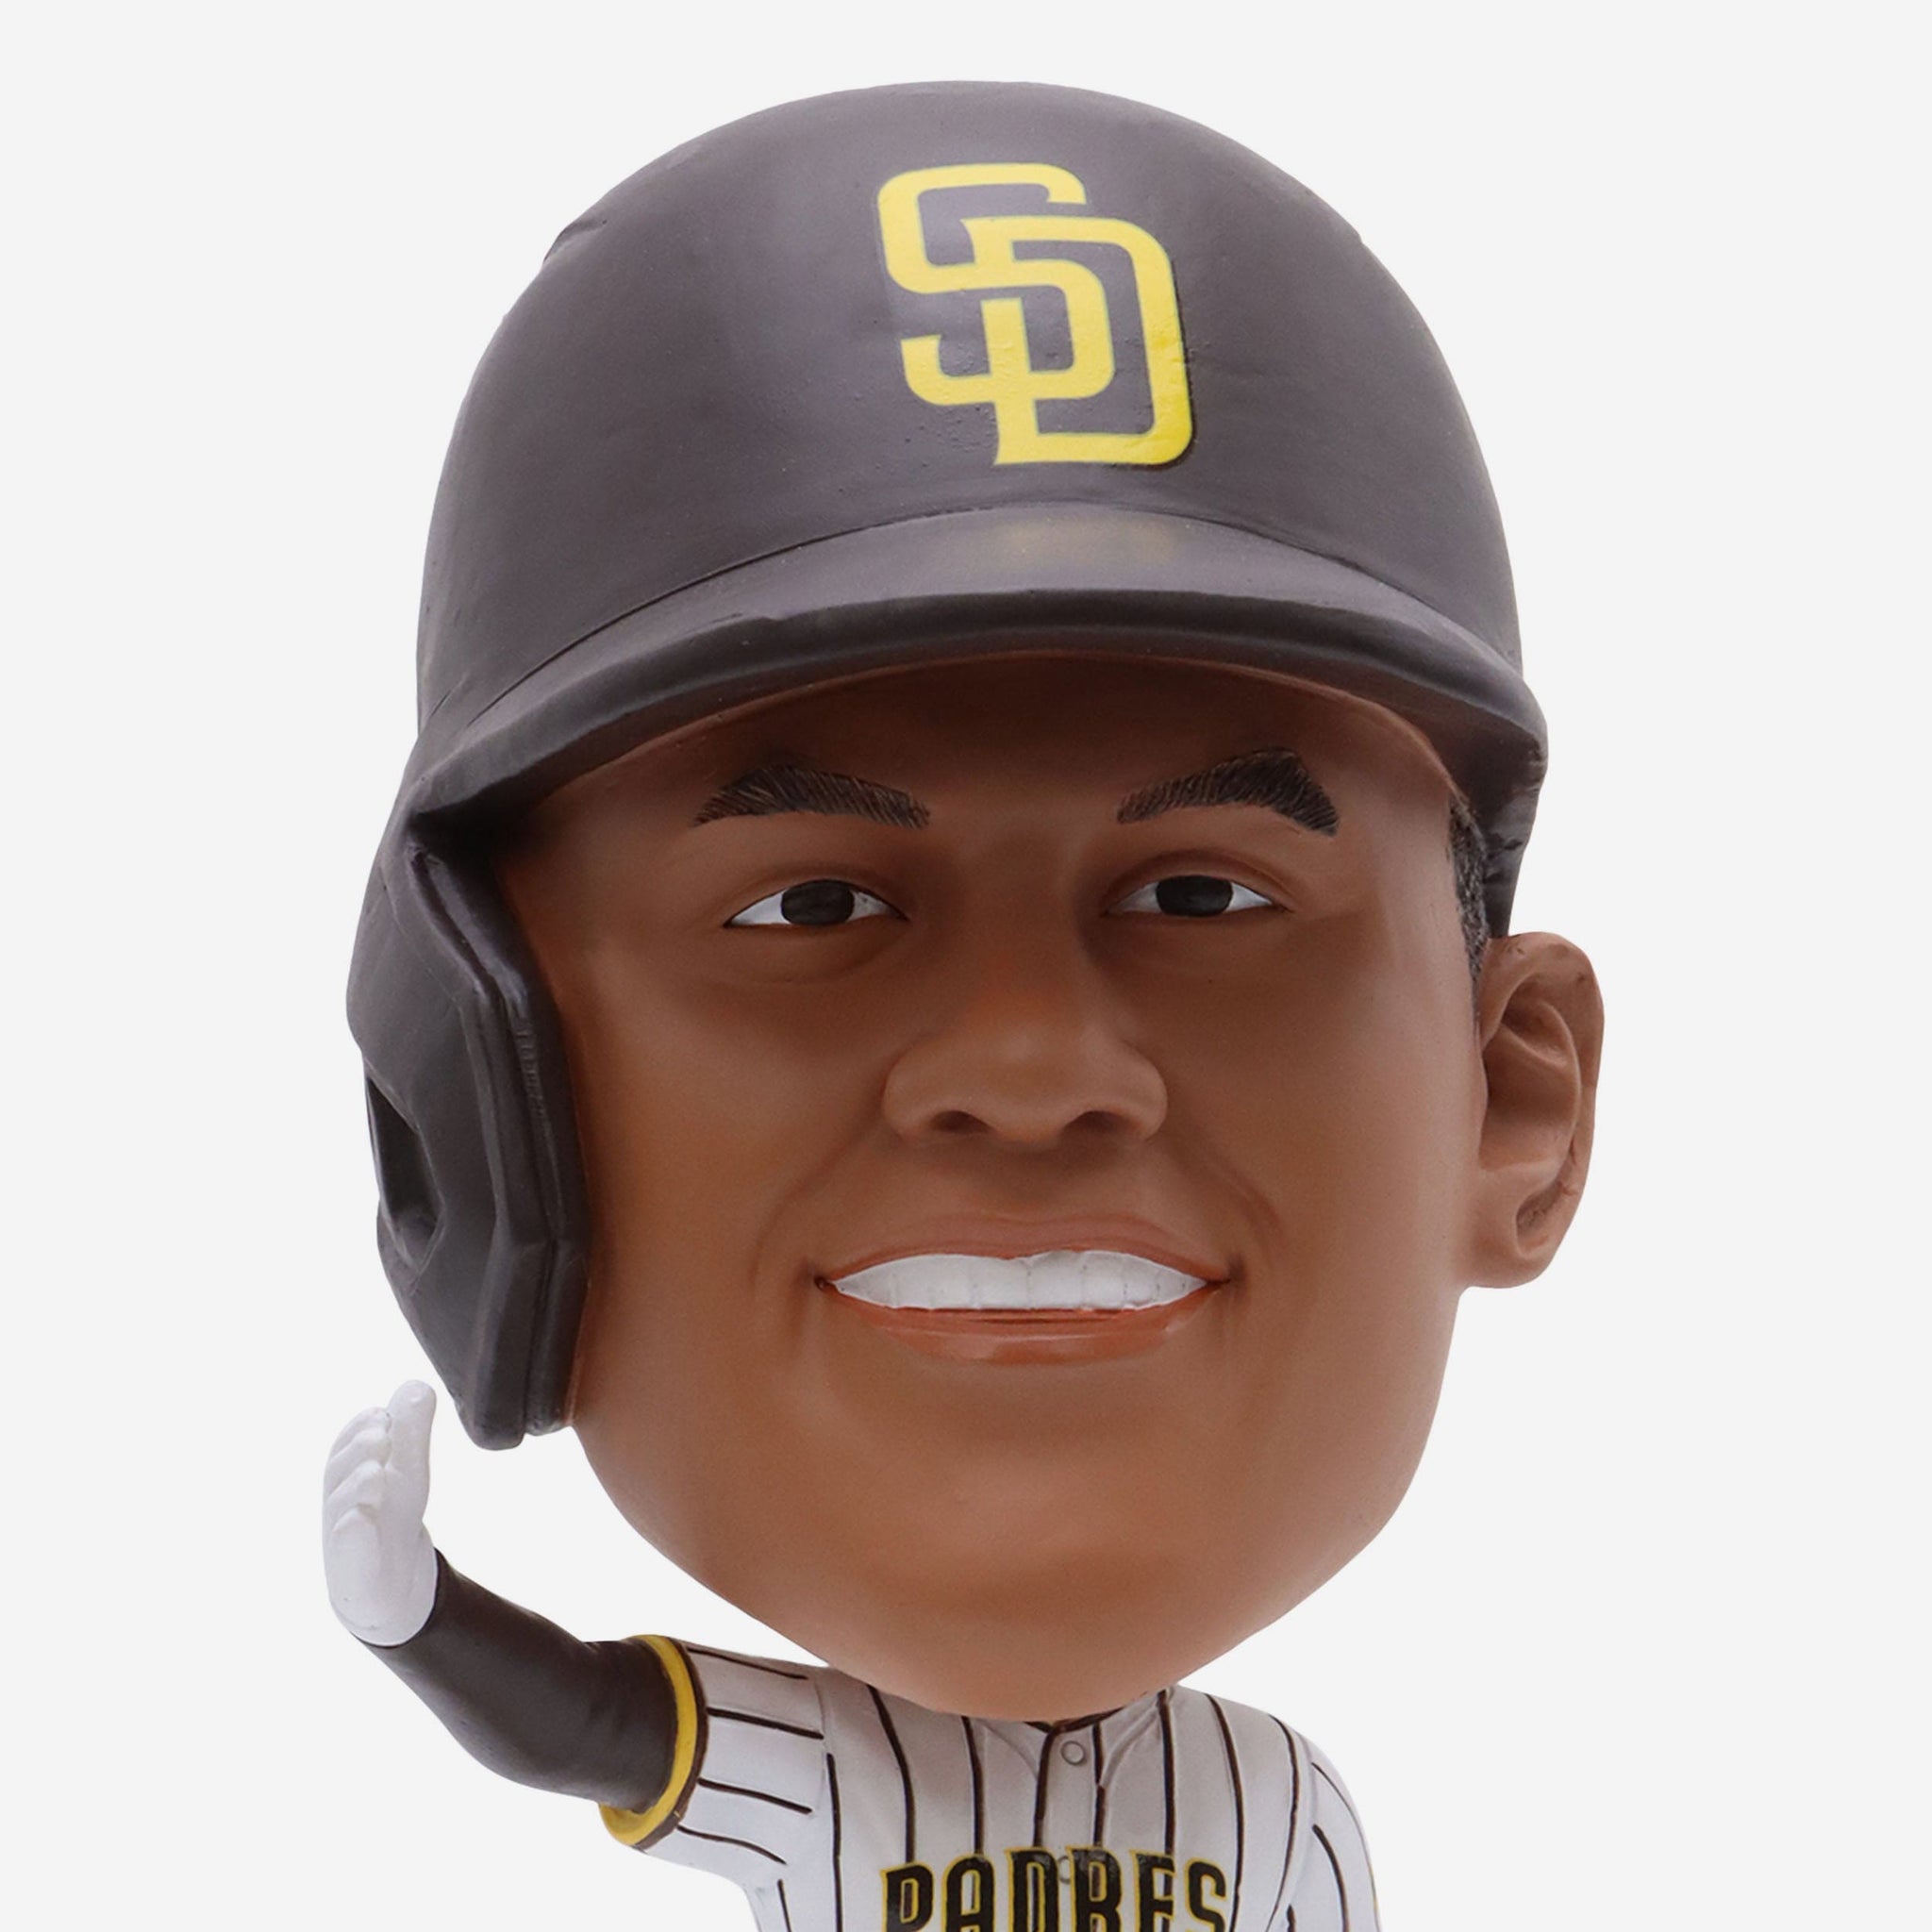 San Diego Padres Apparel, Collectibles, and Fan Gear. FOCO